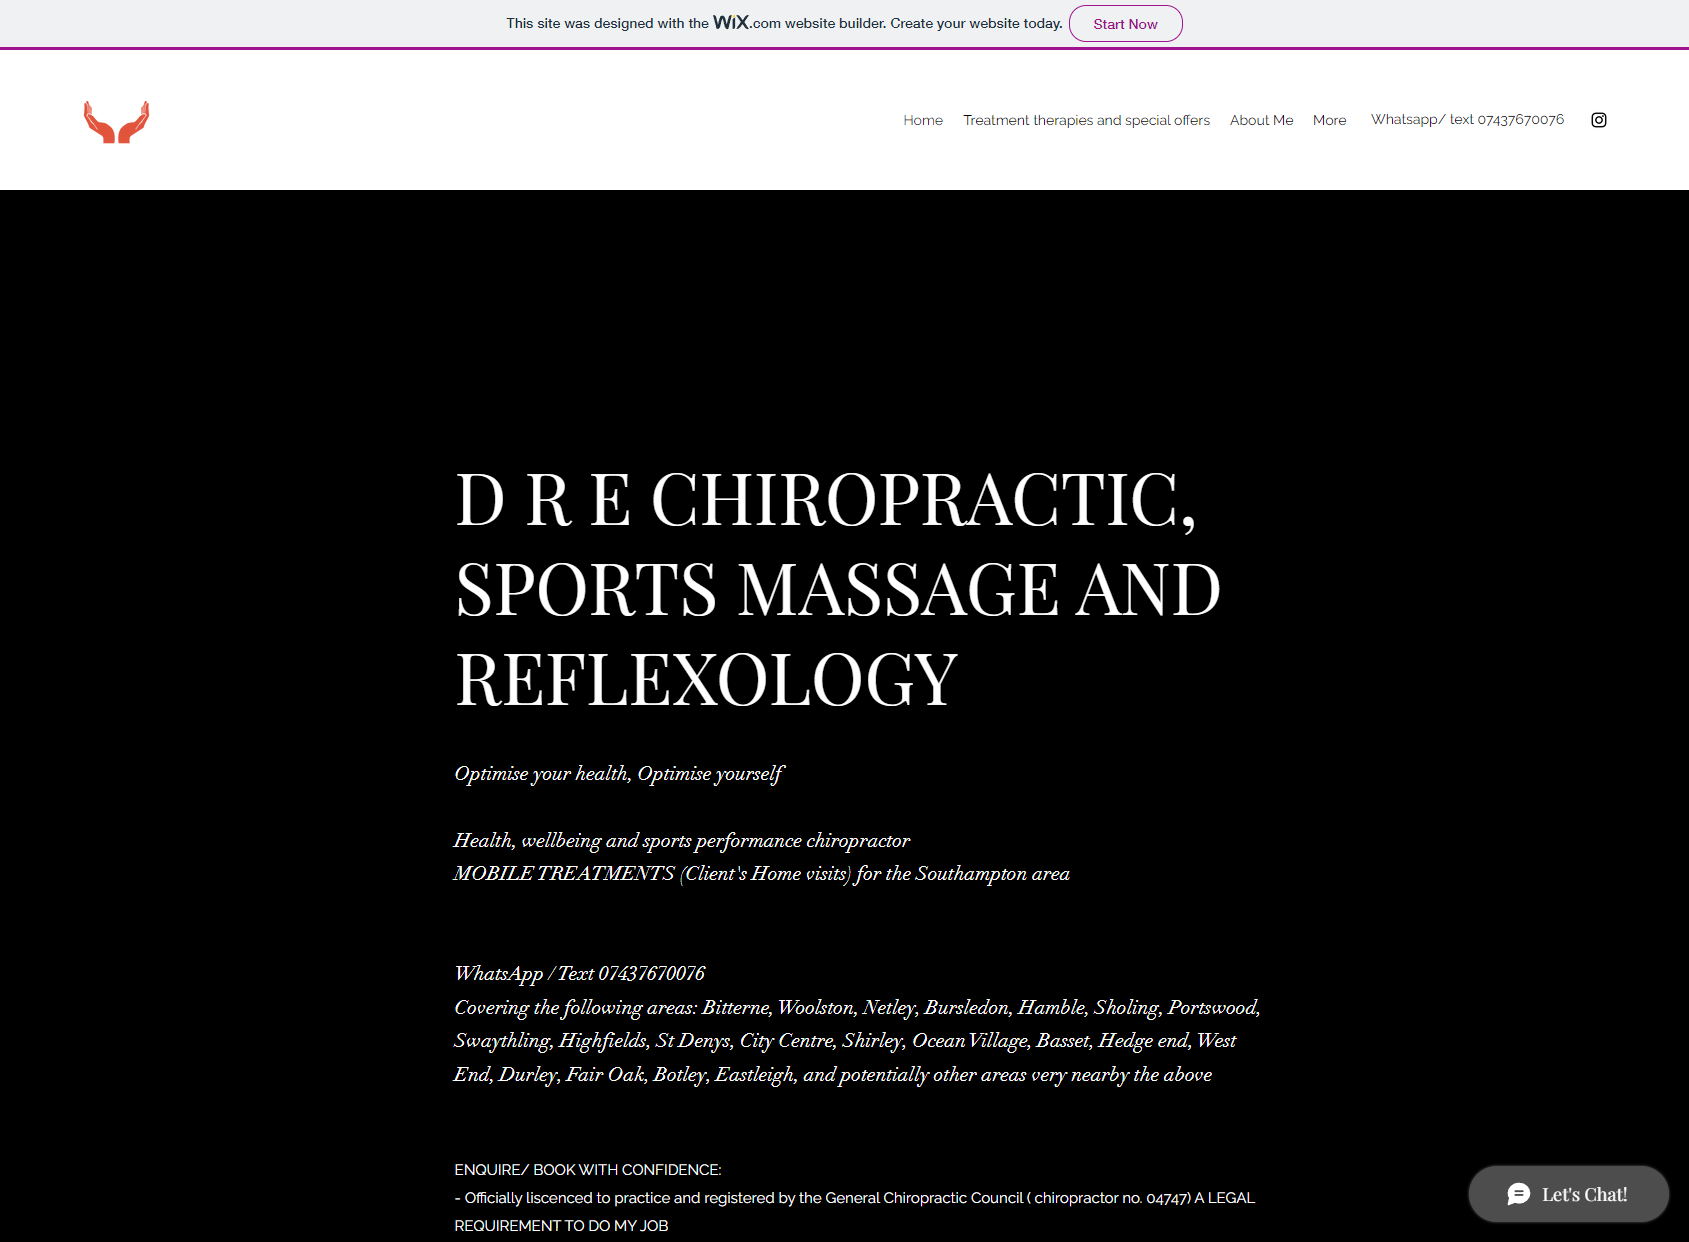 (mobile home treatments) D R E Chiropractic, sports massage and reflexology